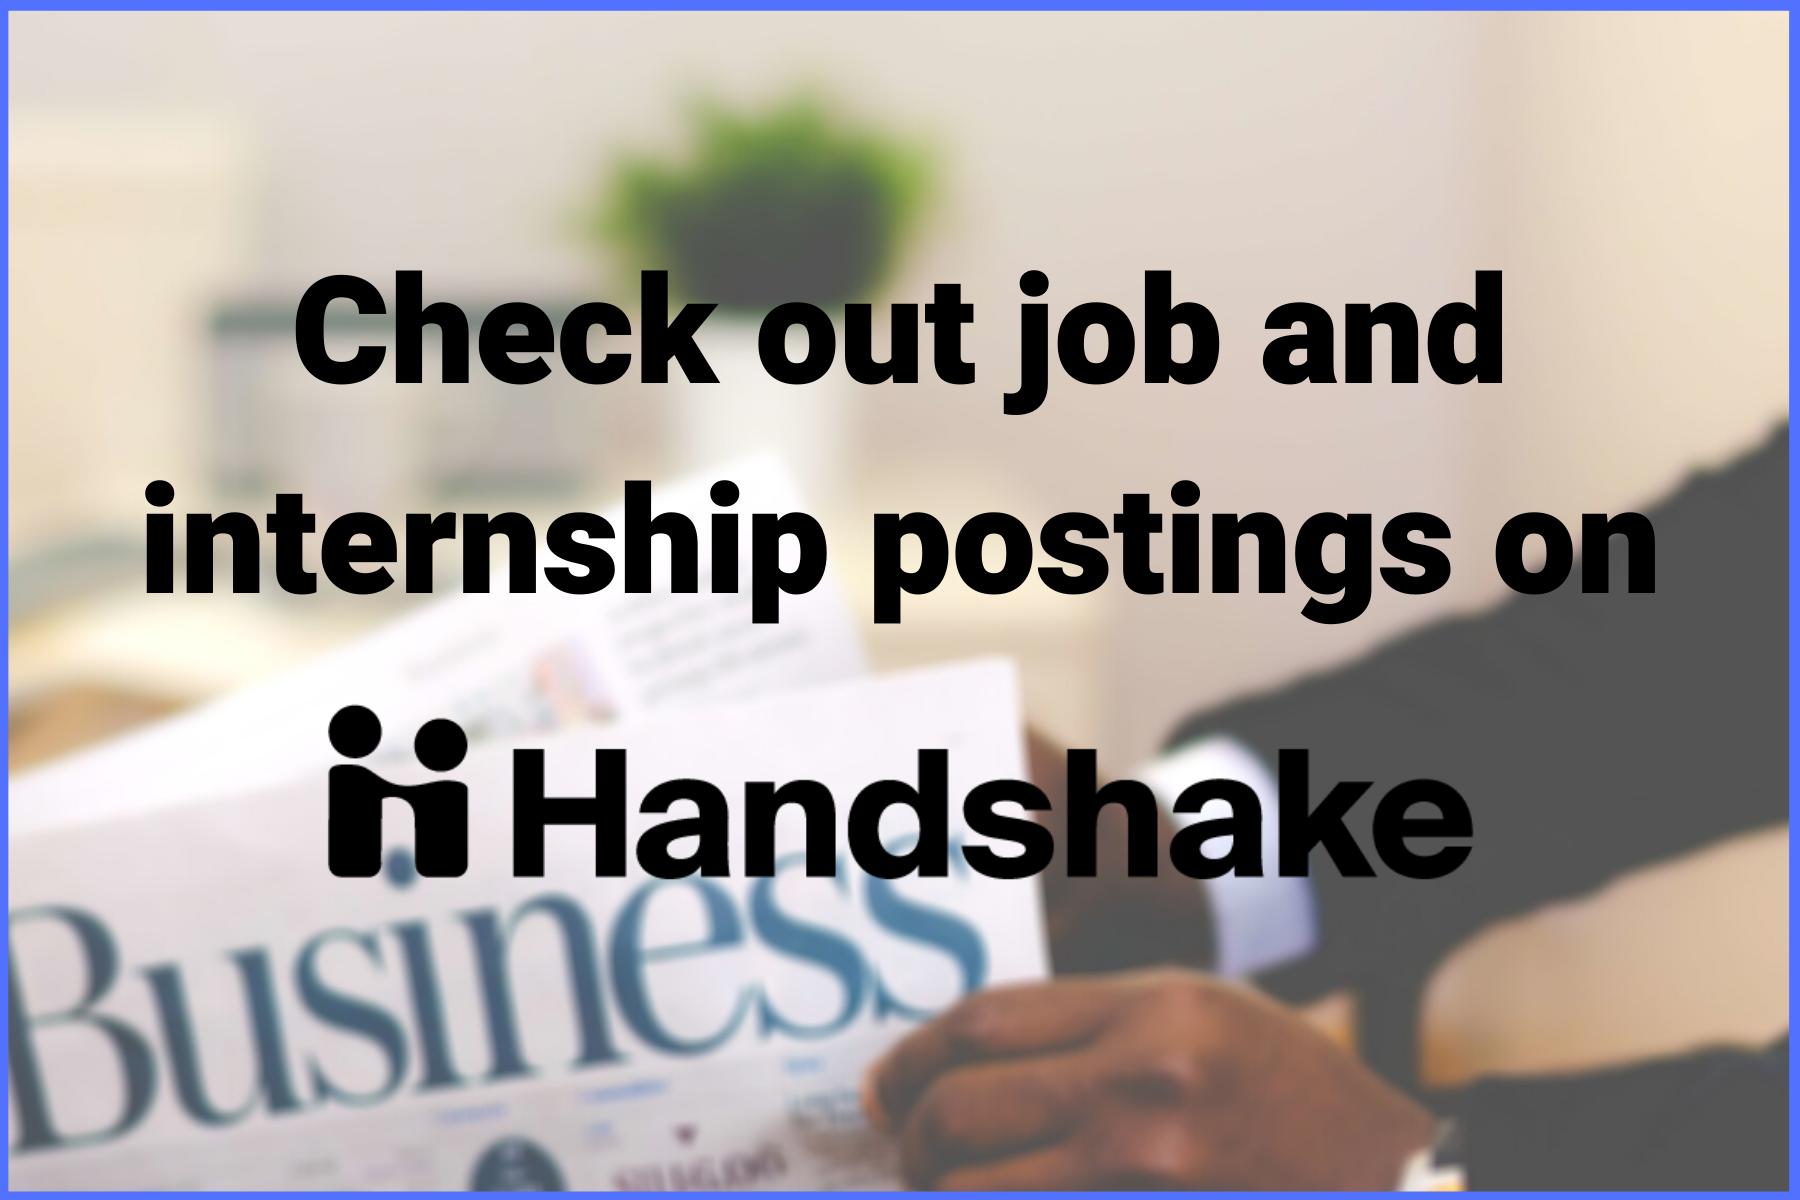 Find opportunities in business and finance on Handshake